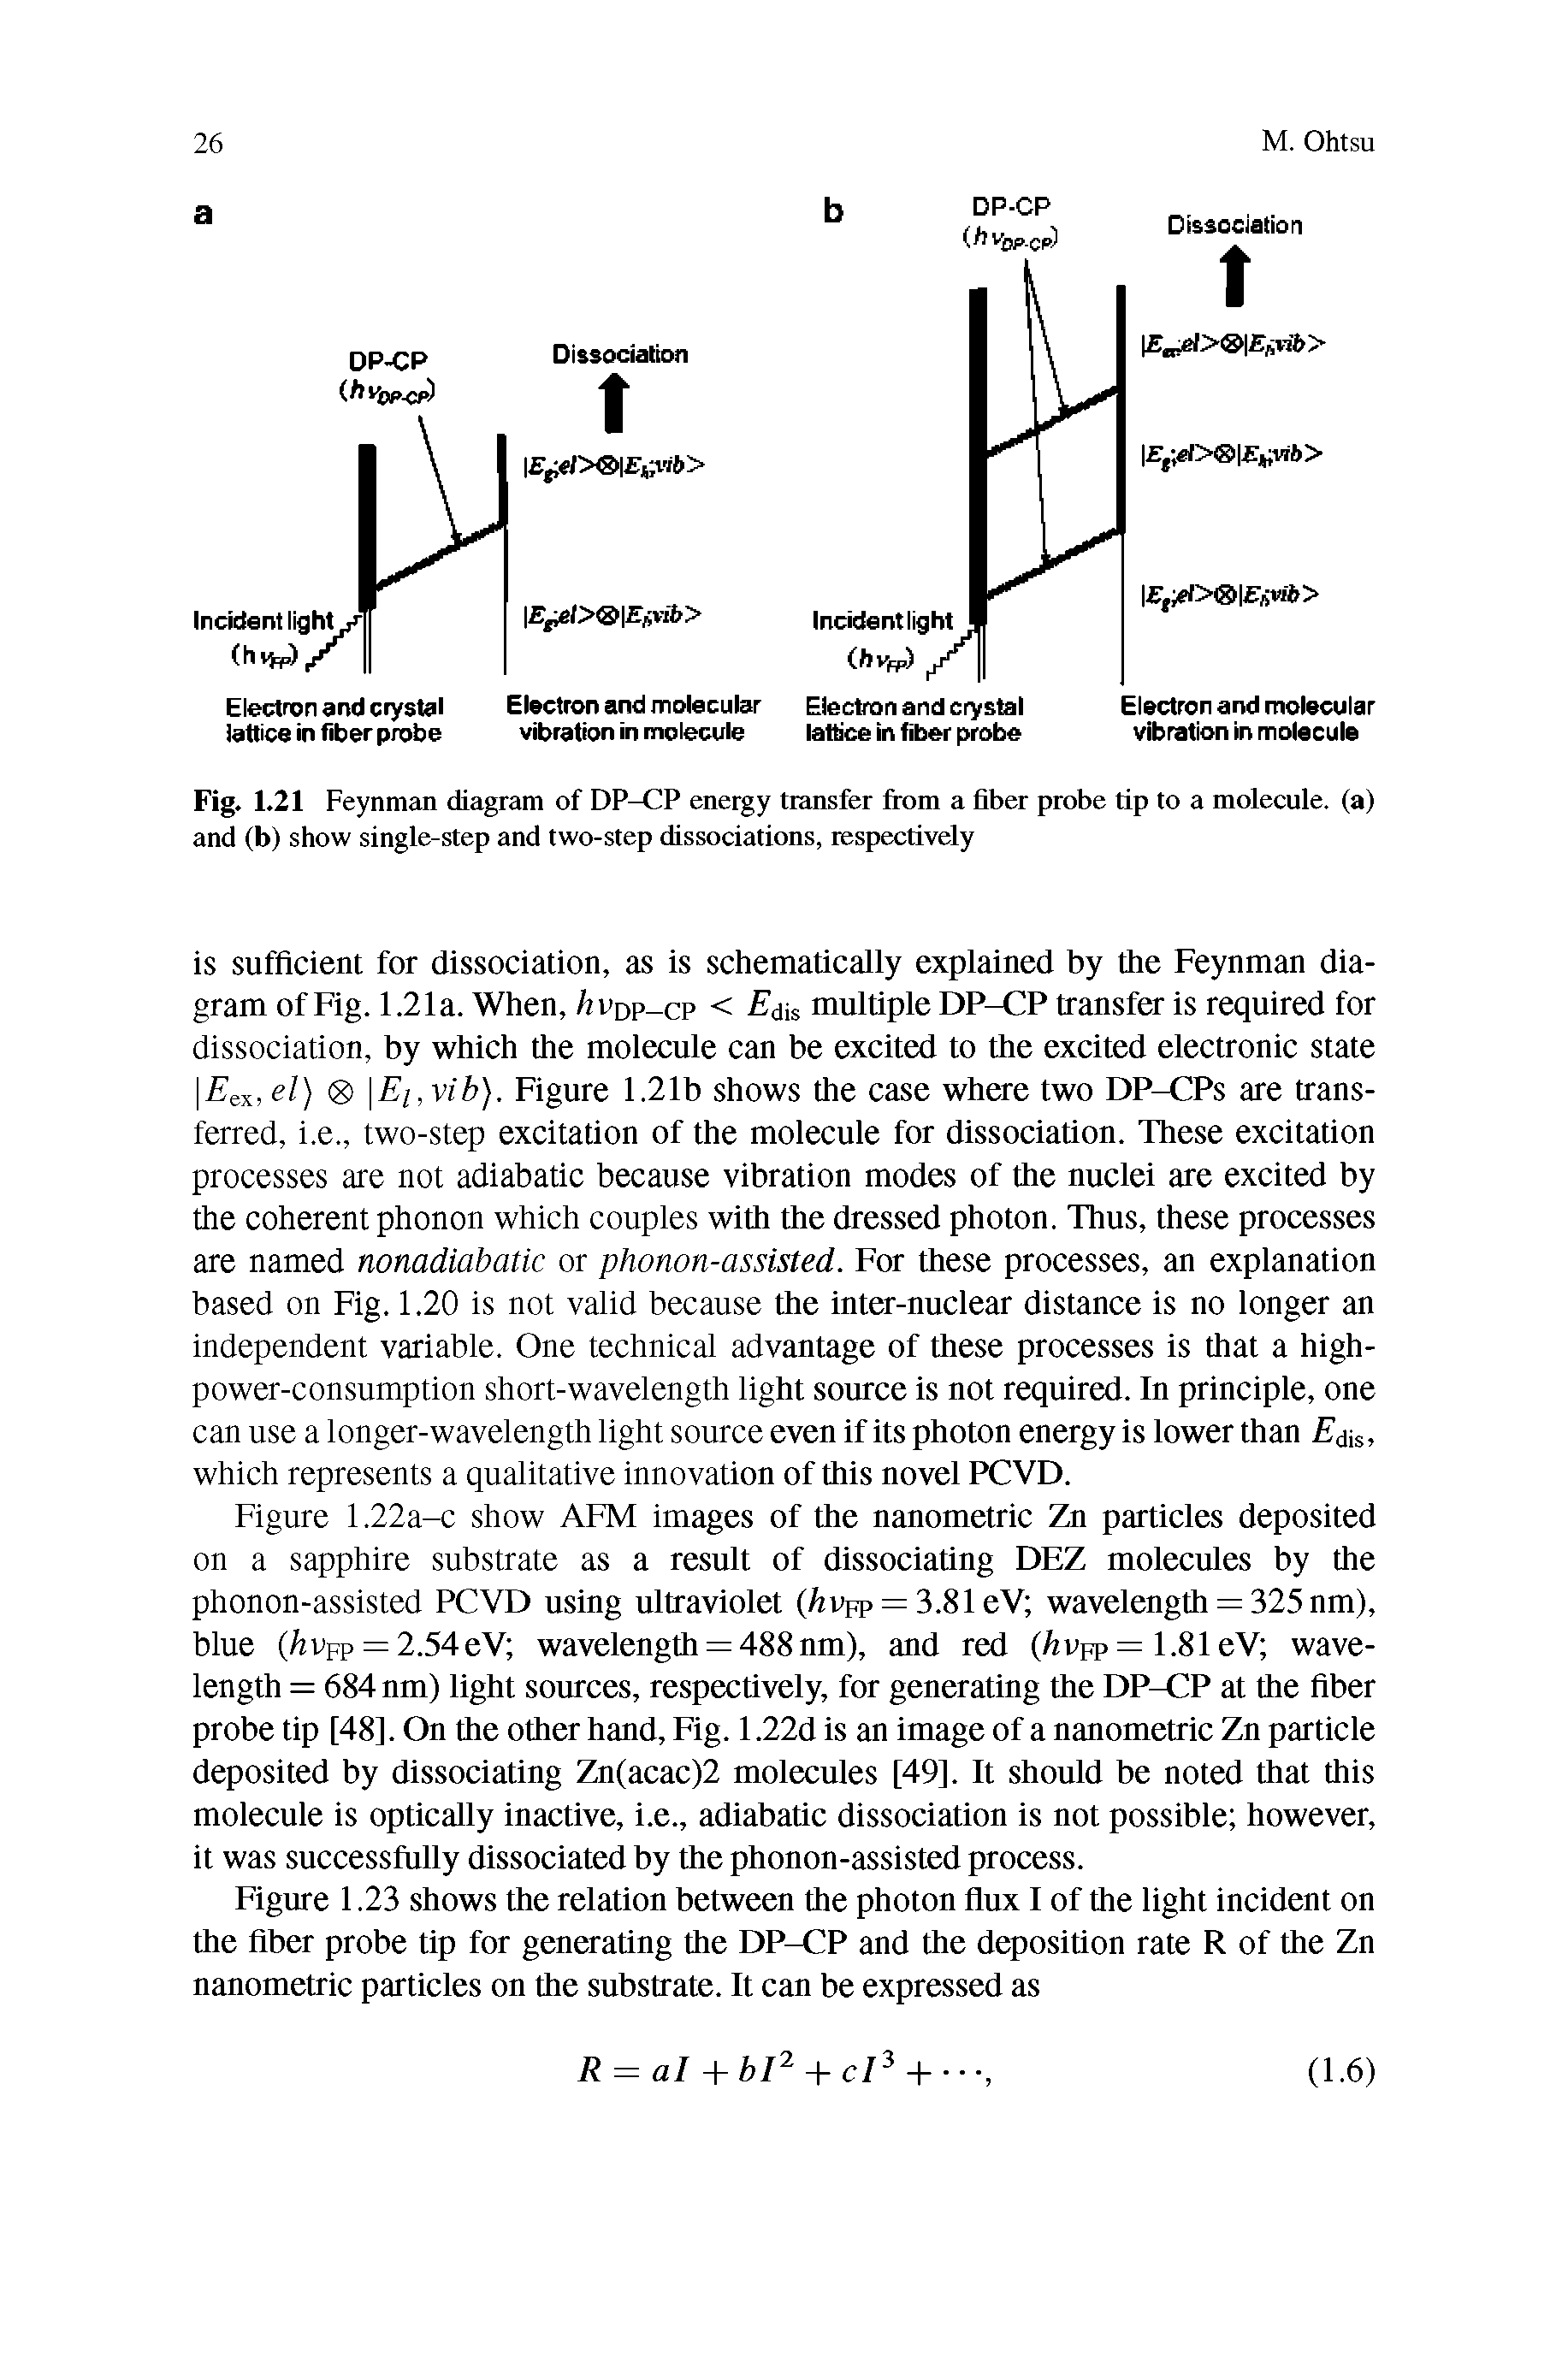 Fig. 1.21 Feynman diagram of DP-CP energy transfer from a fiber probe tip to a molecule, (a) and (b) show single-step and two-step dissociations, respectively...